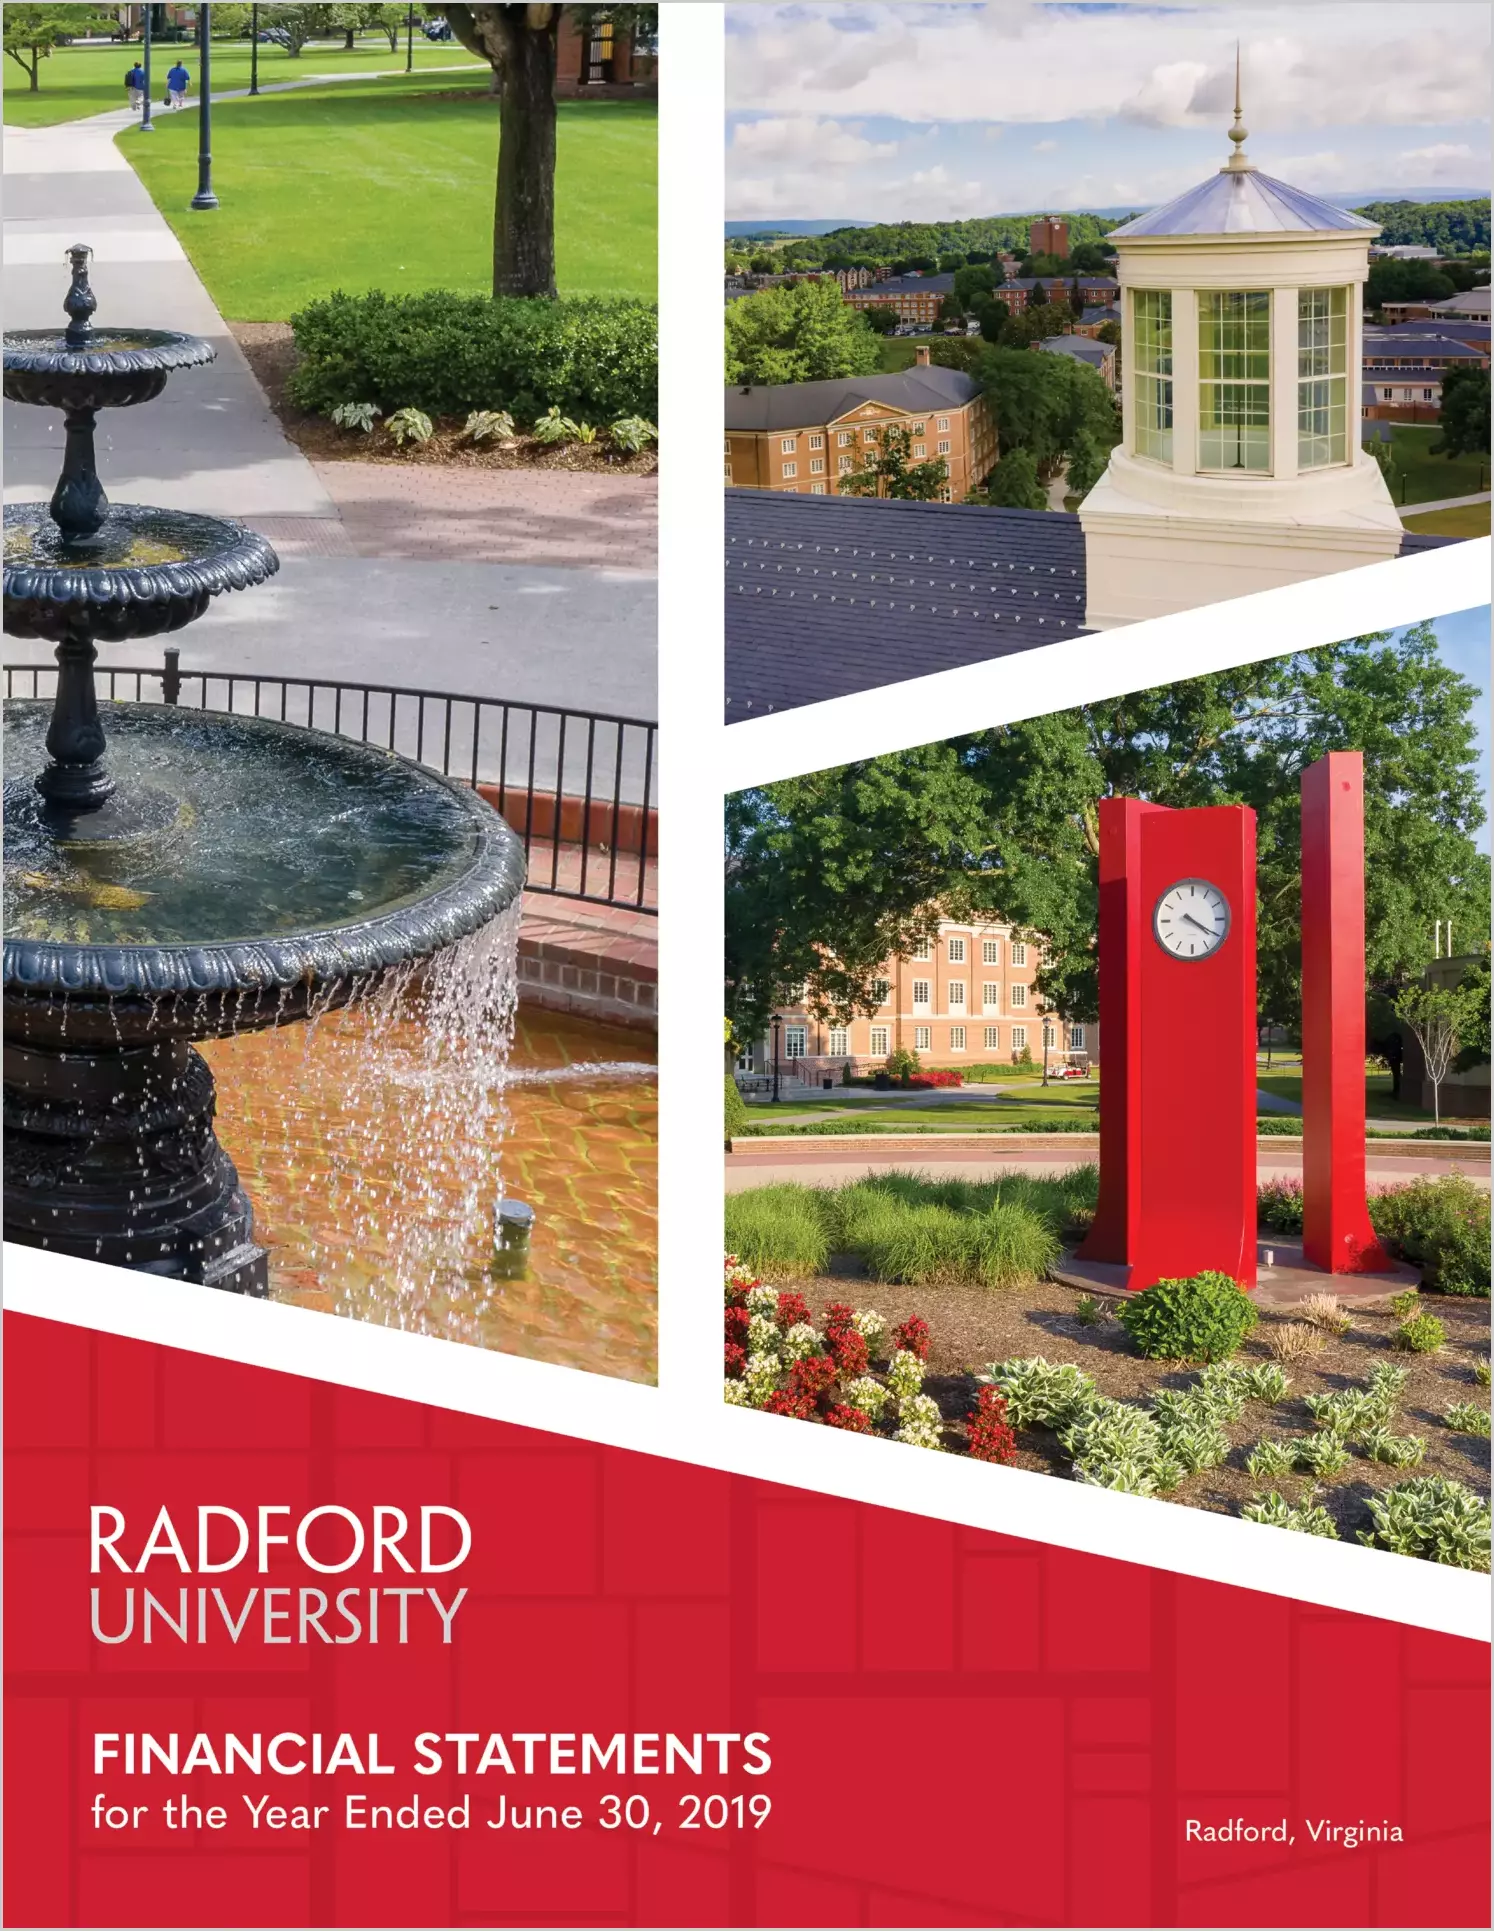 Radford University Financial Statements for the year ended June 30, 2019